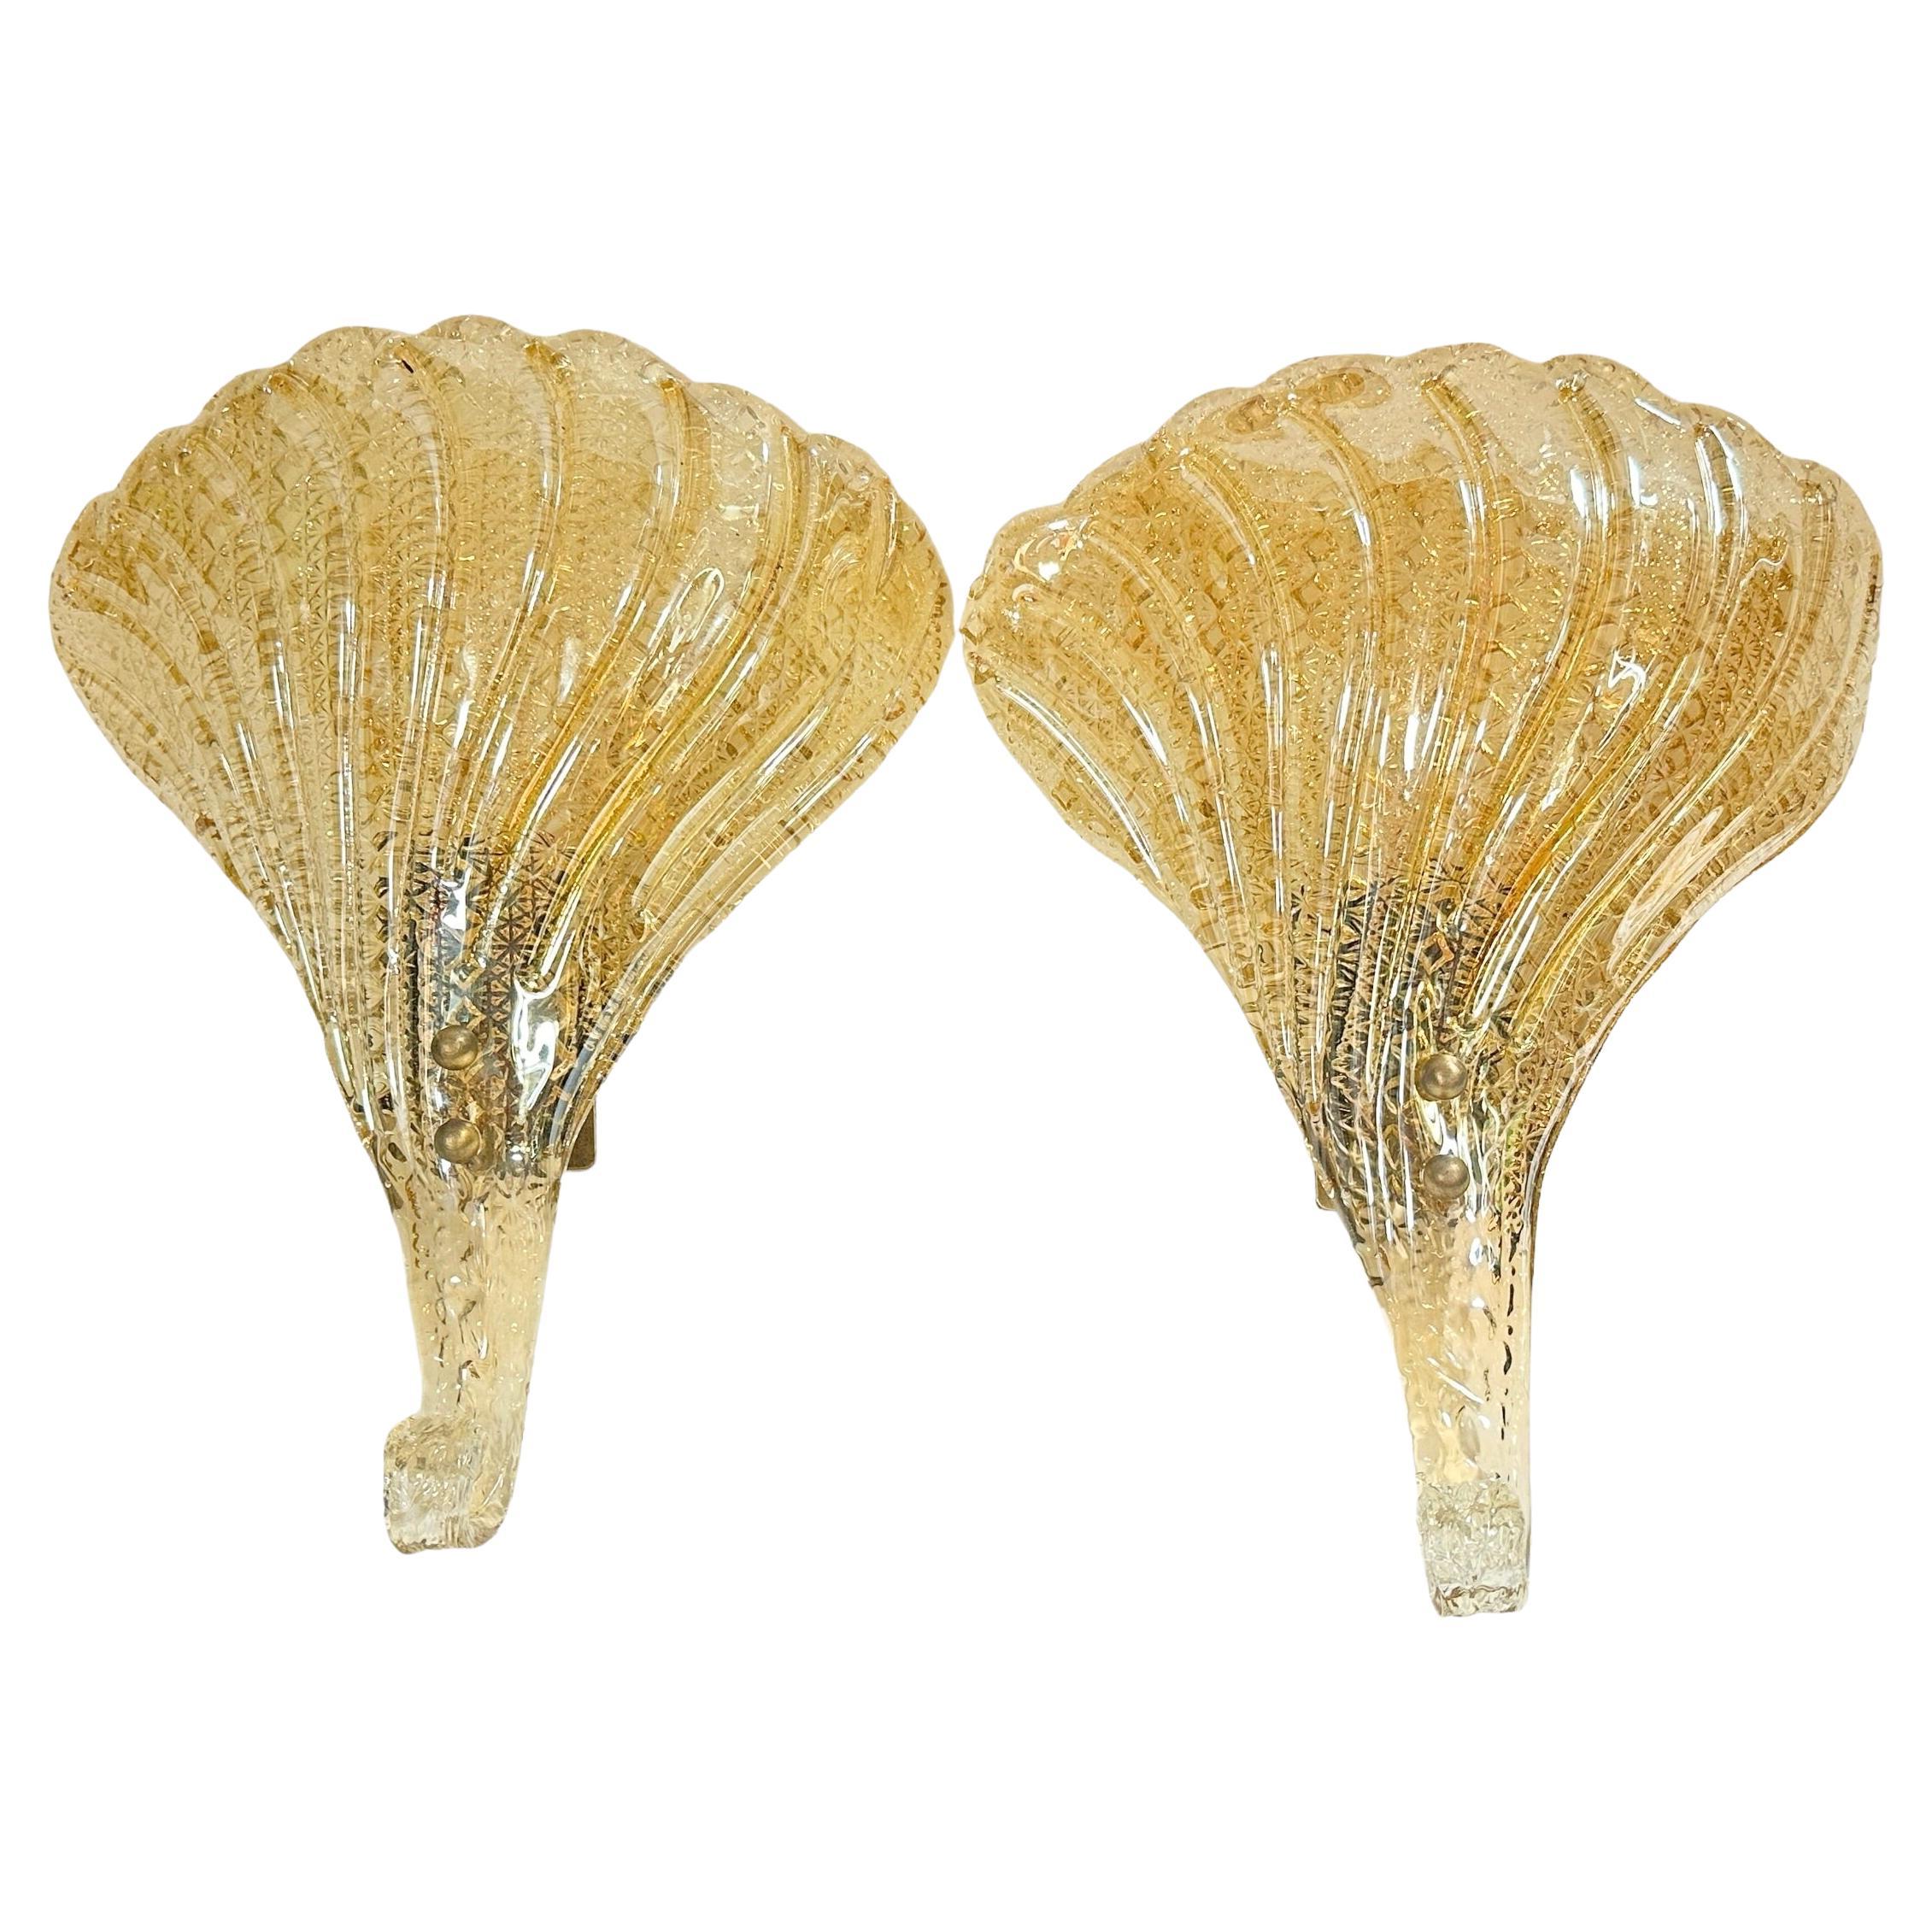 Stunning Pair of Murano Glass Leaf Sconces by Barovier and Toso, Italy